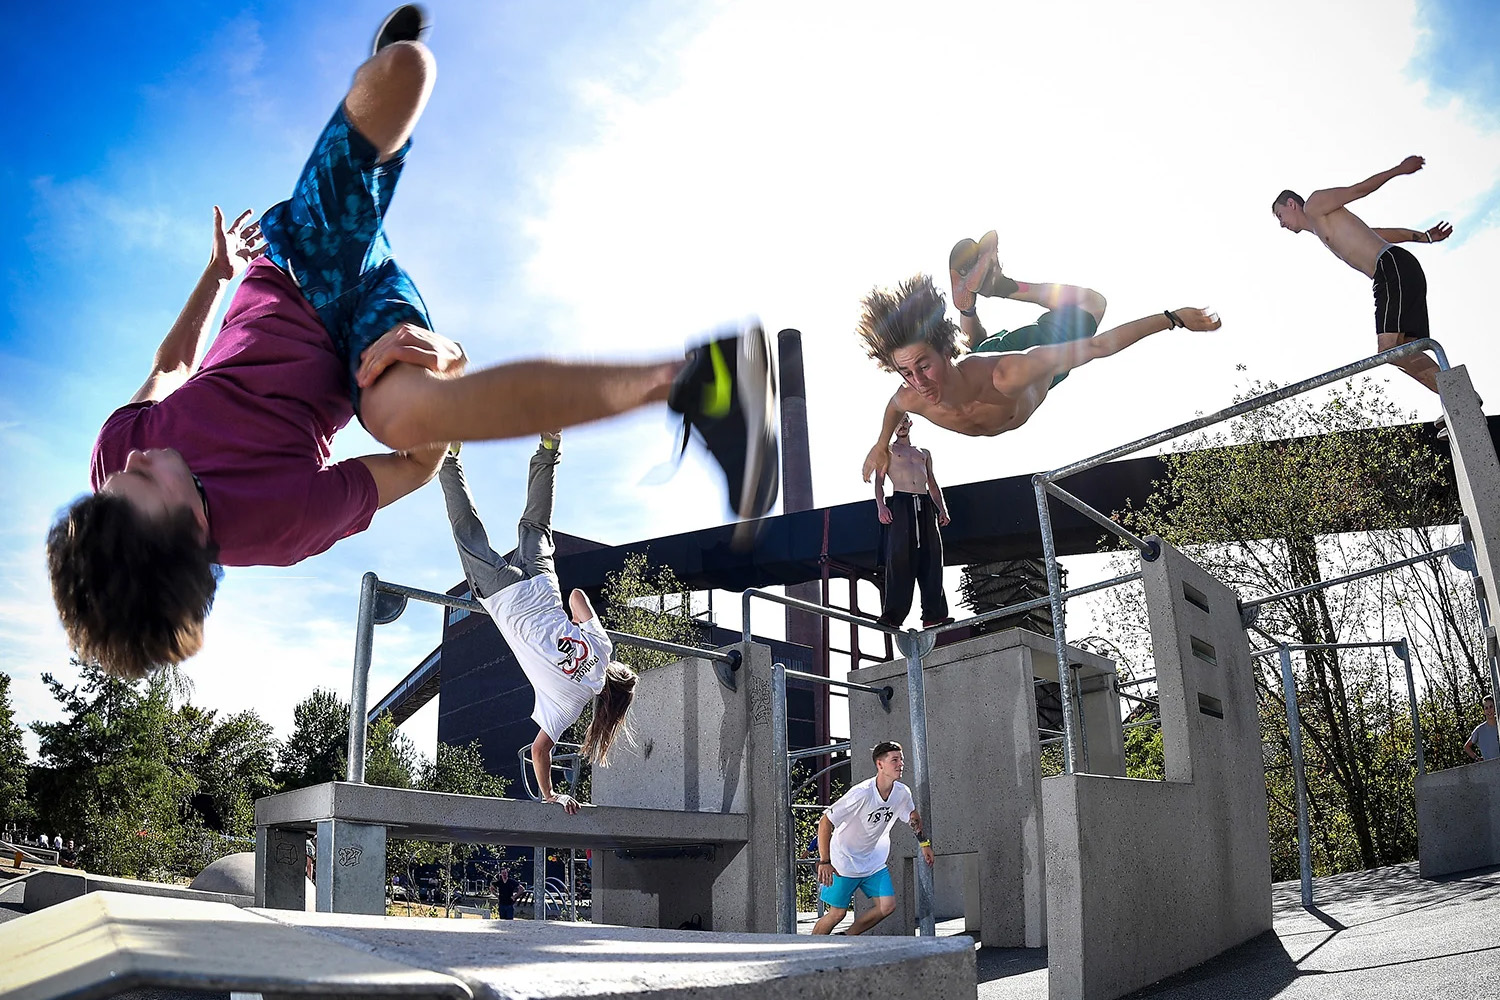 Parkour is approved by Alesp and becomes state law